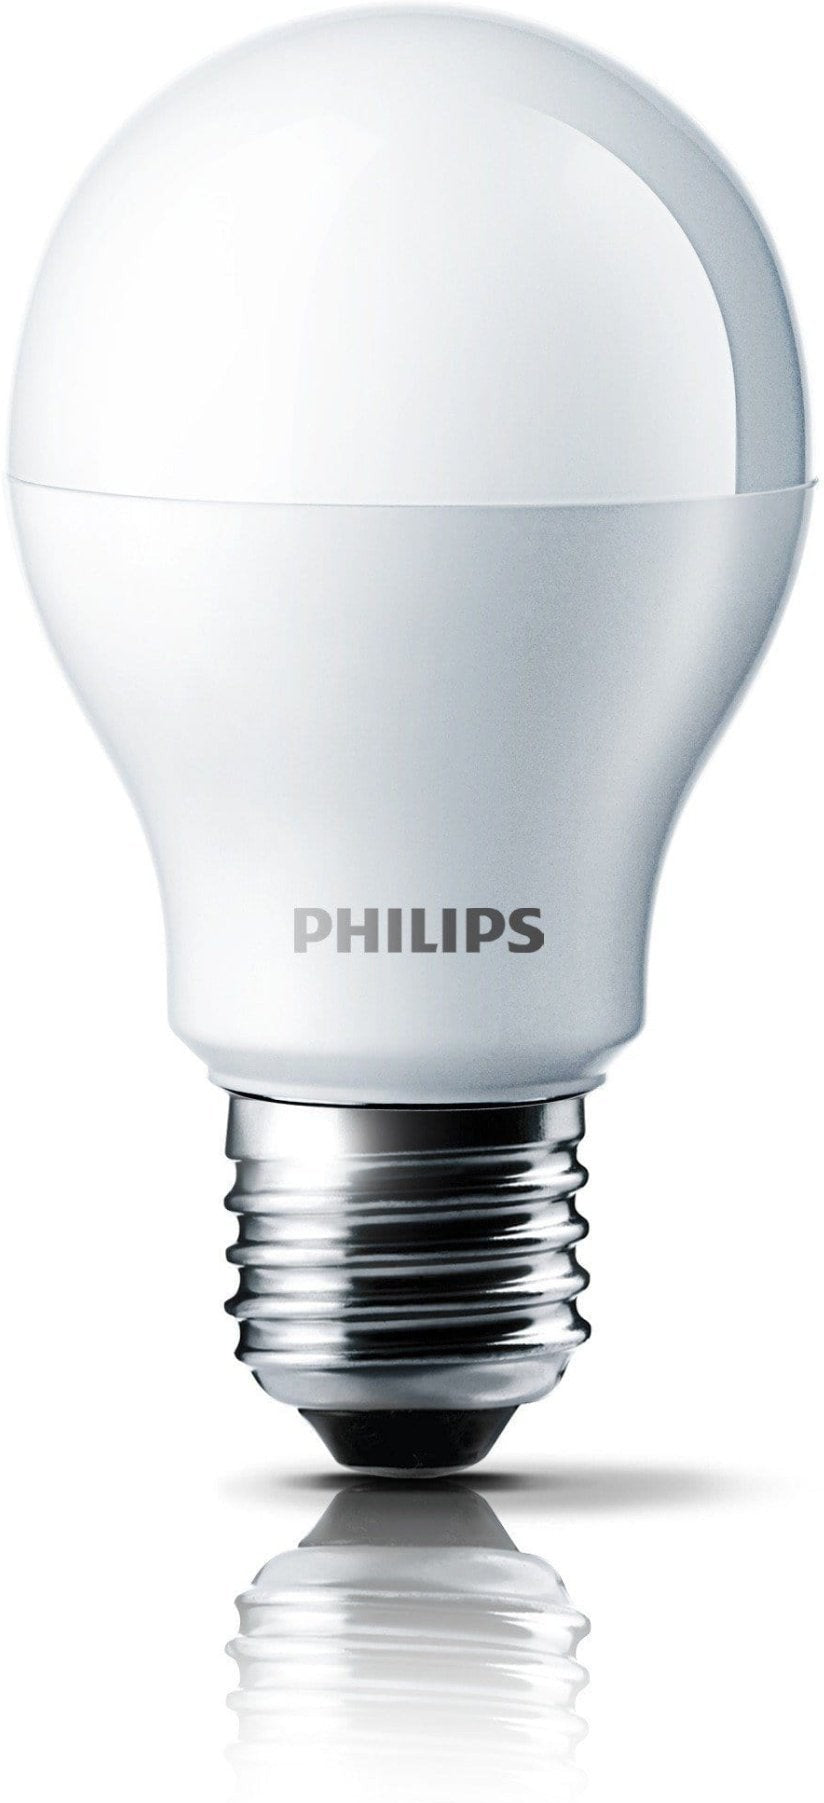 PHILIPS LED Scene Switch E27 A60 Bulb - LED Color Changing Lights - DELIGHT OptoElectronics Pte. Ltd